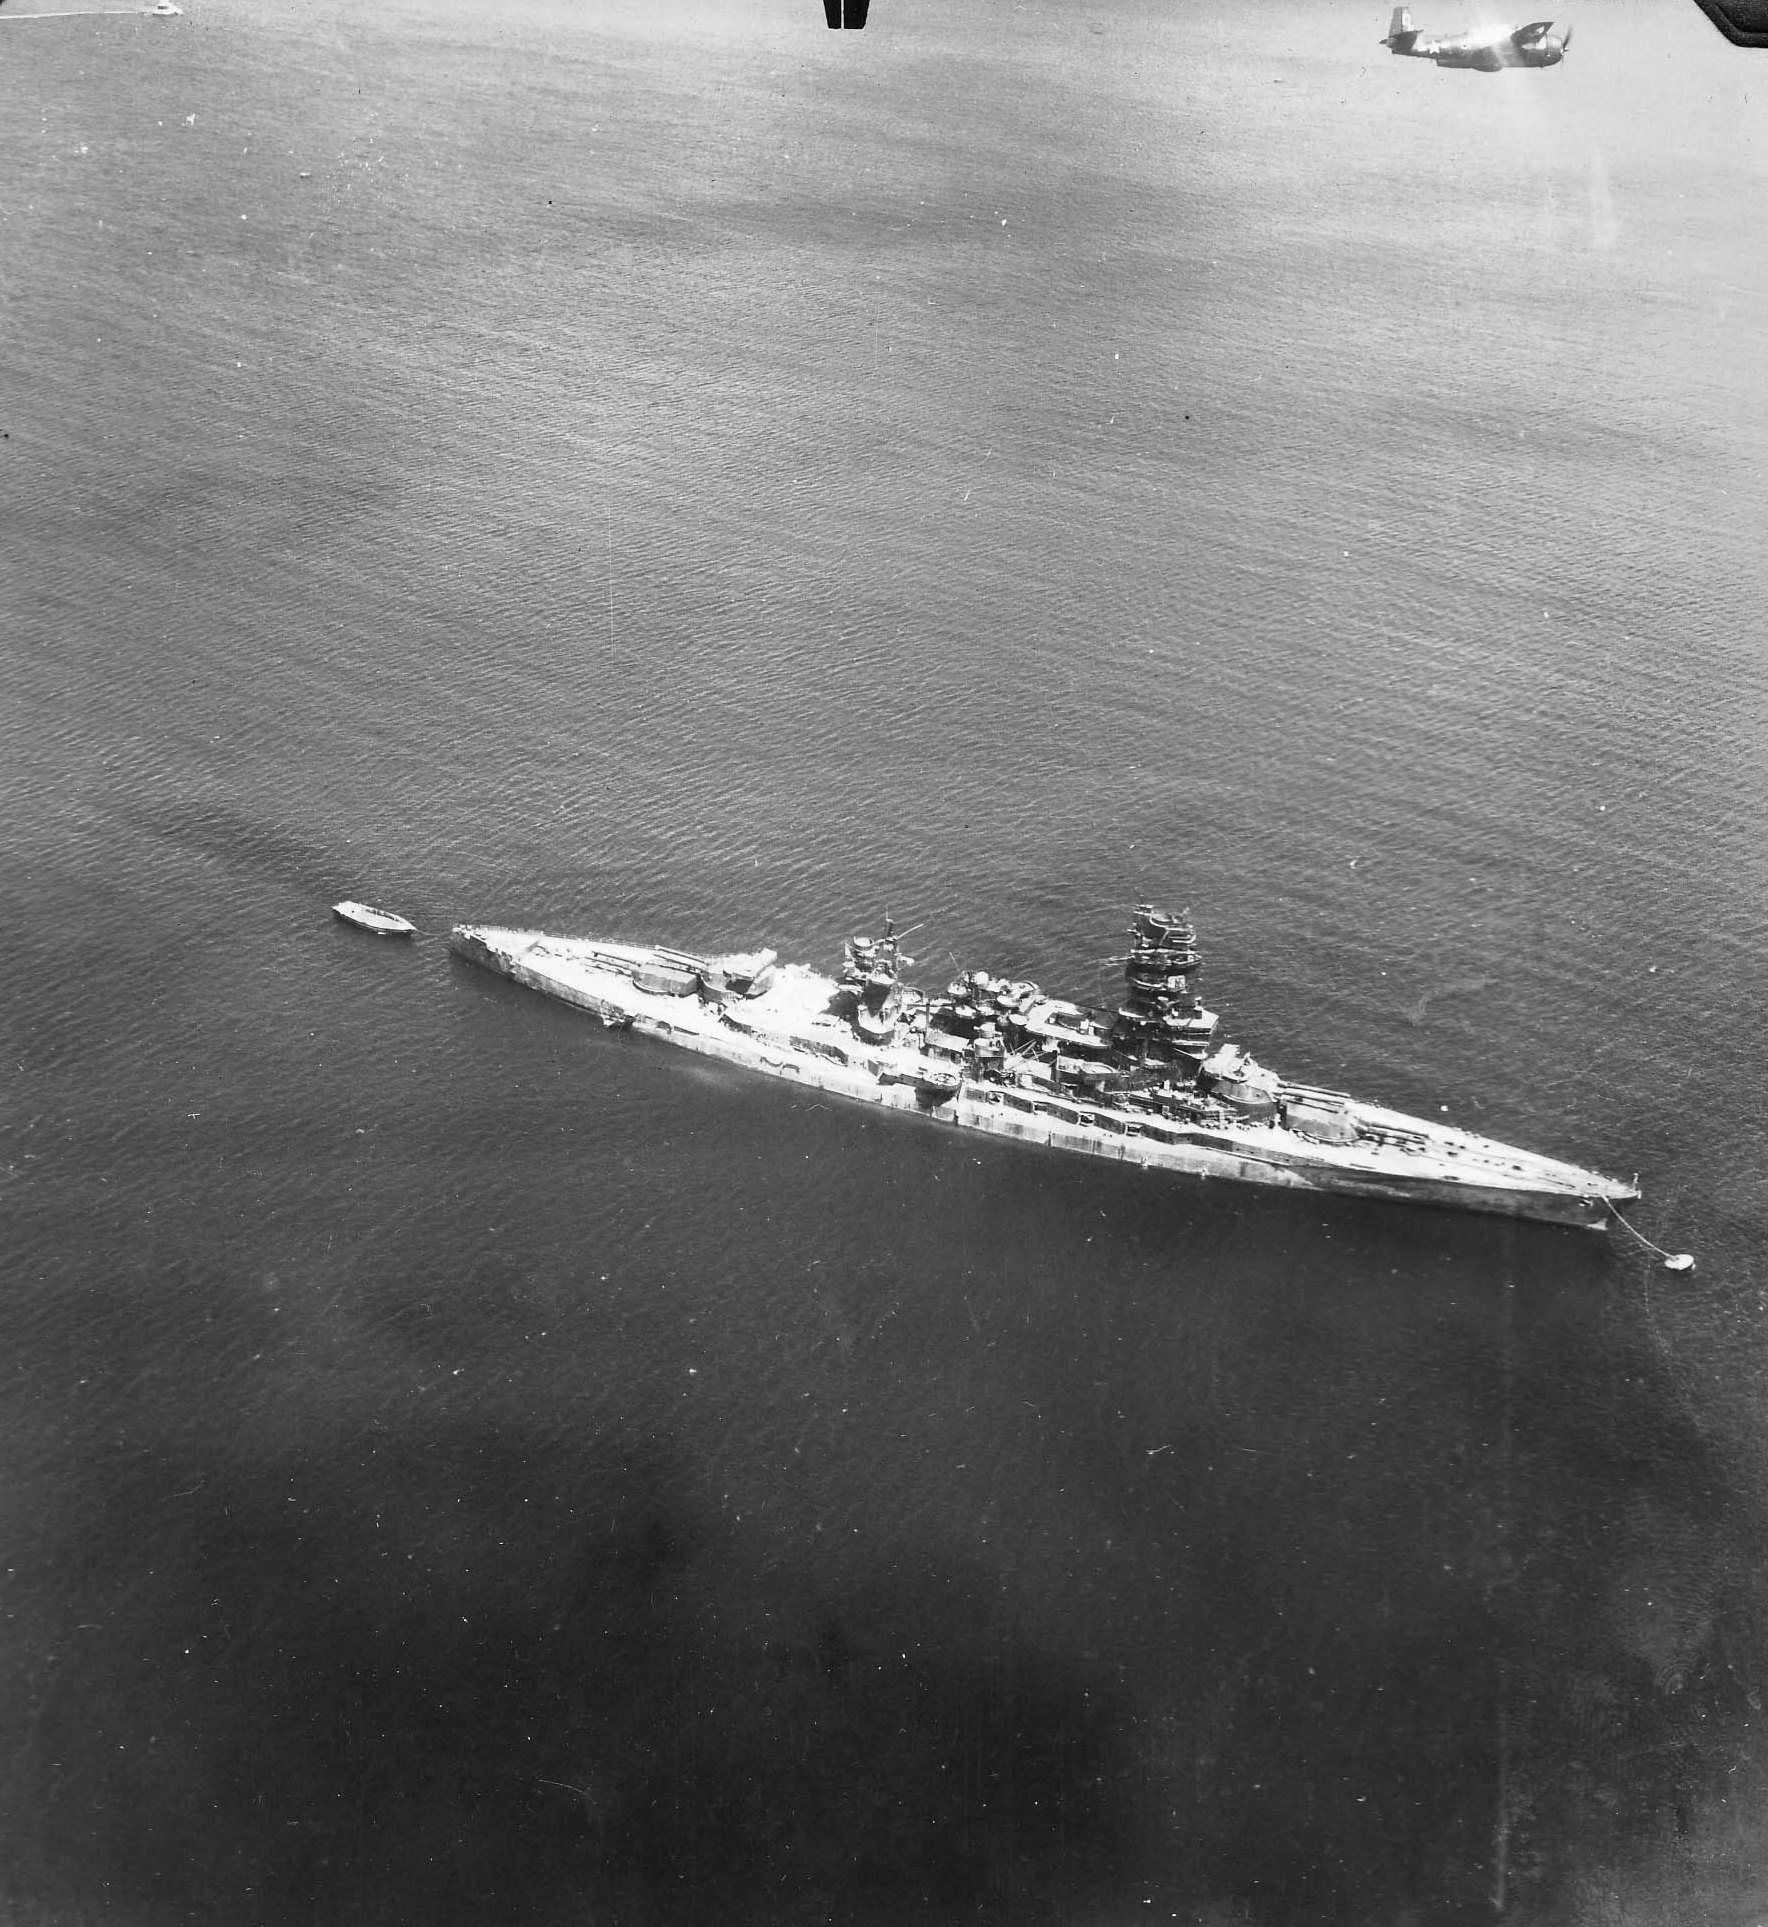 Post-war photo of a TBM-3 Avenger from Torpedo Squadron VT-27 from the aircraft carrier USS Independence flying over the Japanese battleship Nagato at Yokosuka, Japan, Aug-Sep 1945